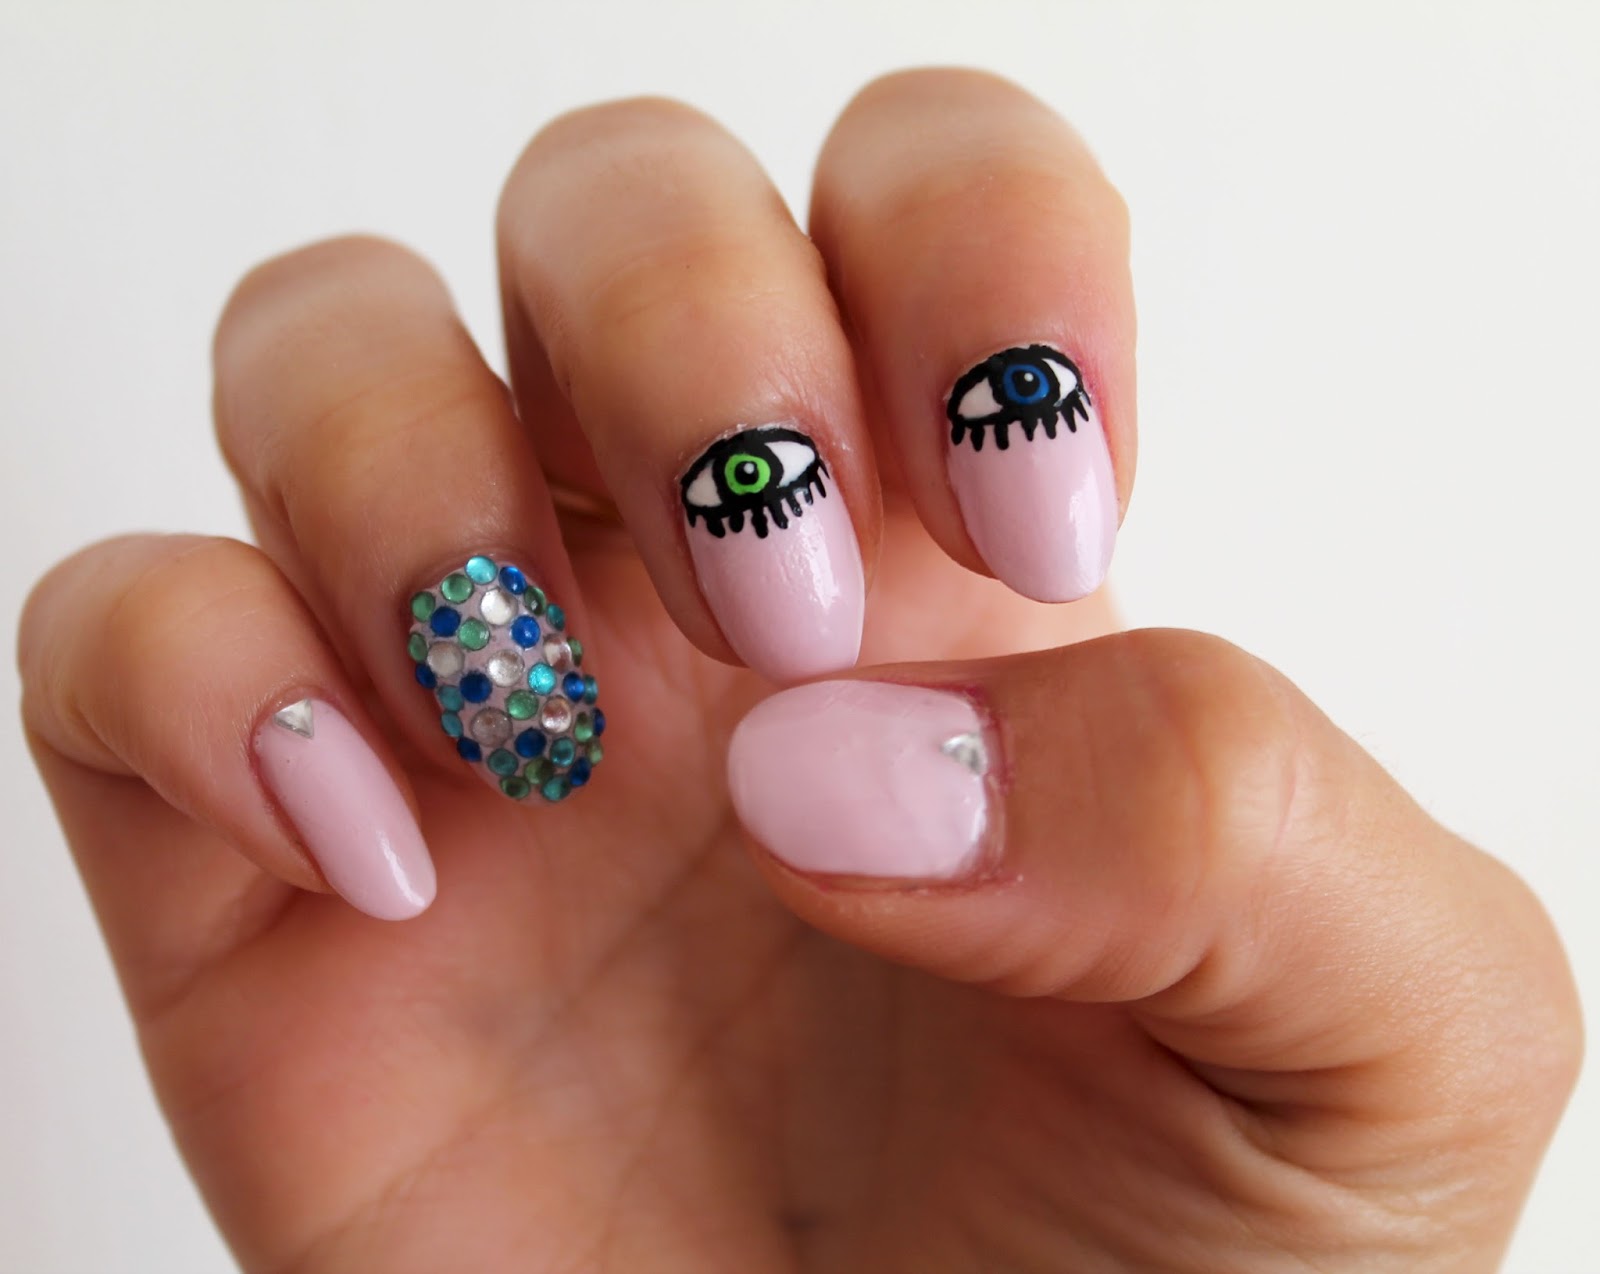 Nails With Evil Eye Design